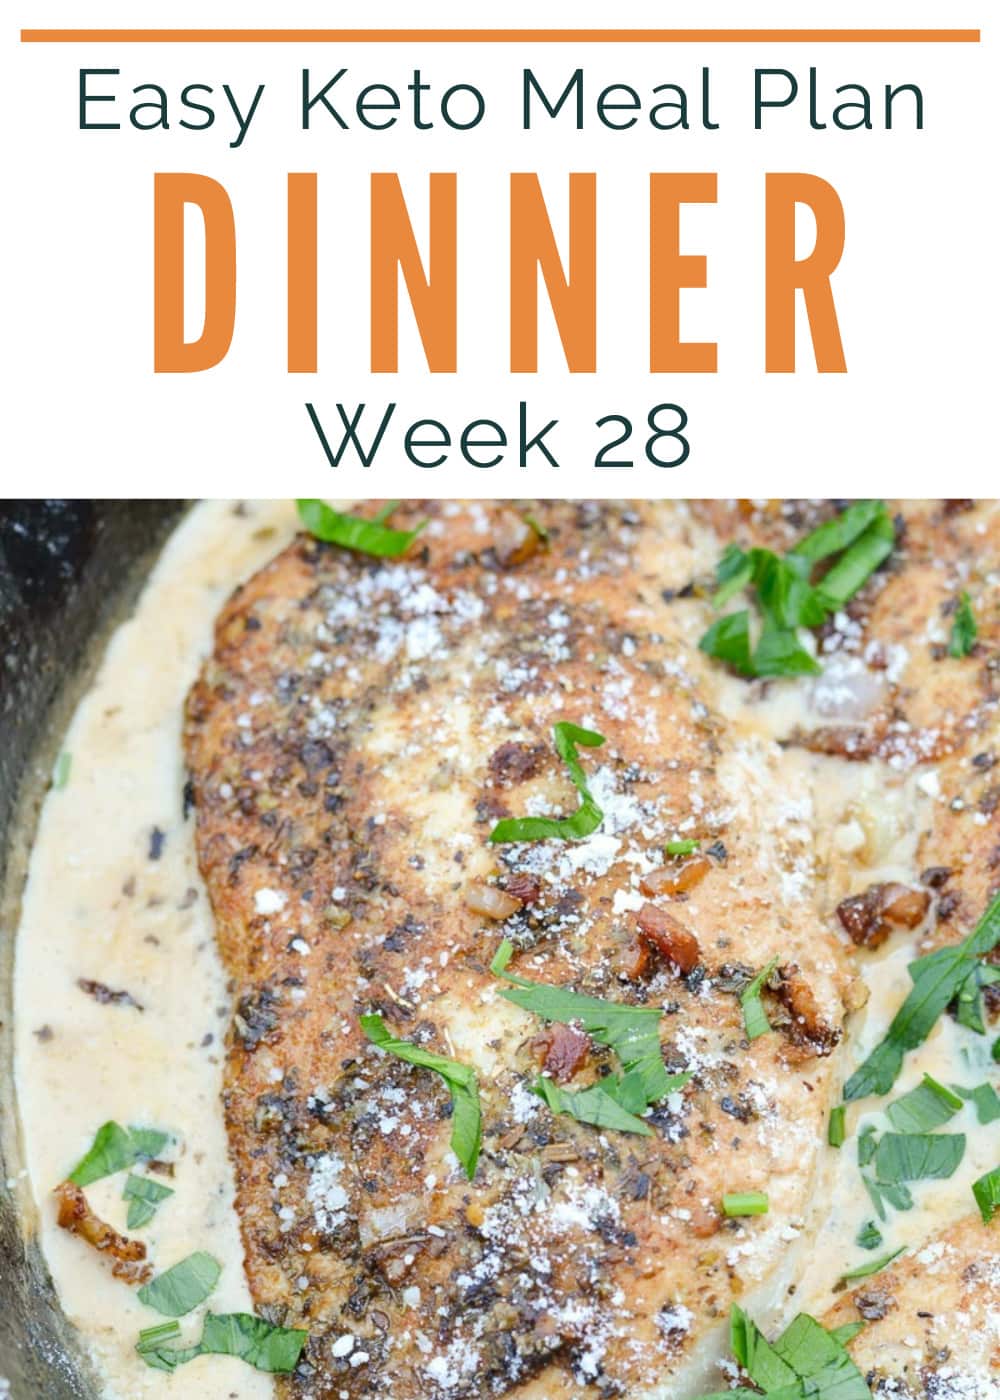 This week’s Easy Keto Meal Plan features 5 delicious low-carb dinners plus an easy keto meal prep breakfast! I’ve included net carb counts, meal prep tips, and a printable shopping list to help make the keto diet easier to manage!